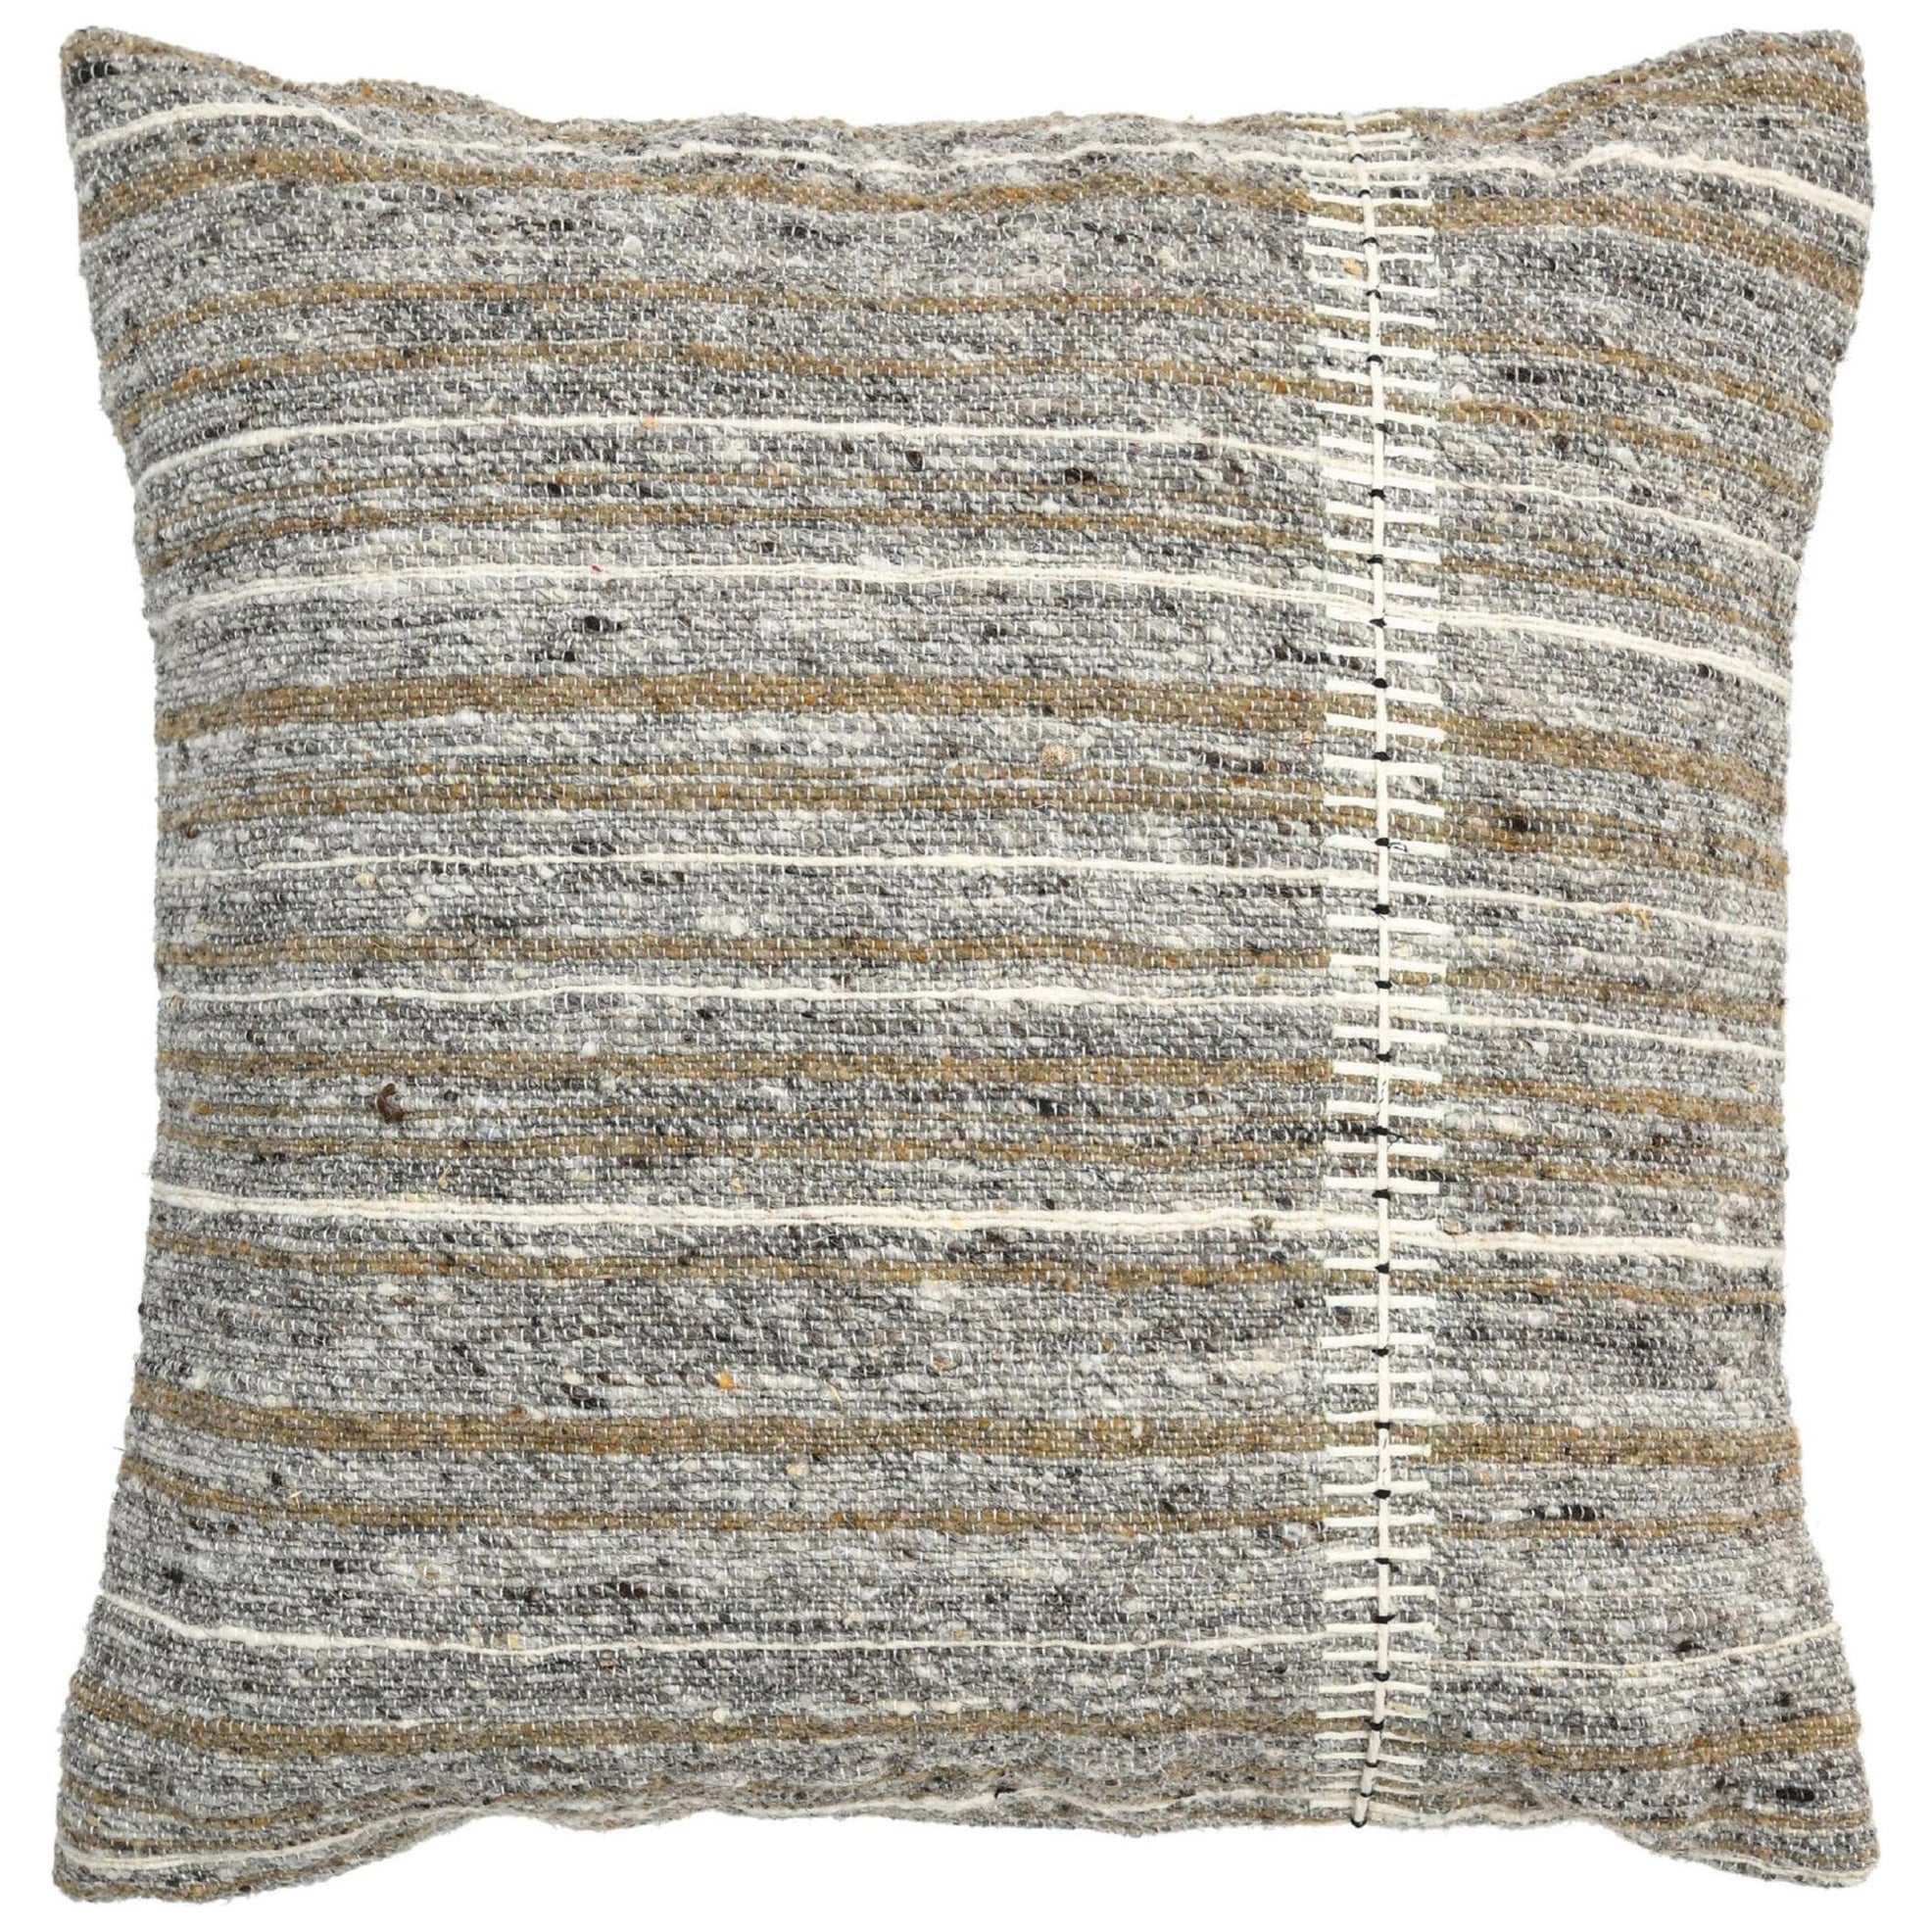 Boho Chic Style Modern Wool and Cotton Pillow In Muted Tones For Sale